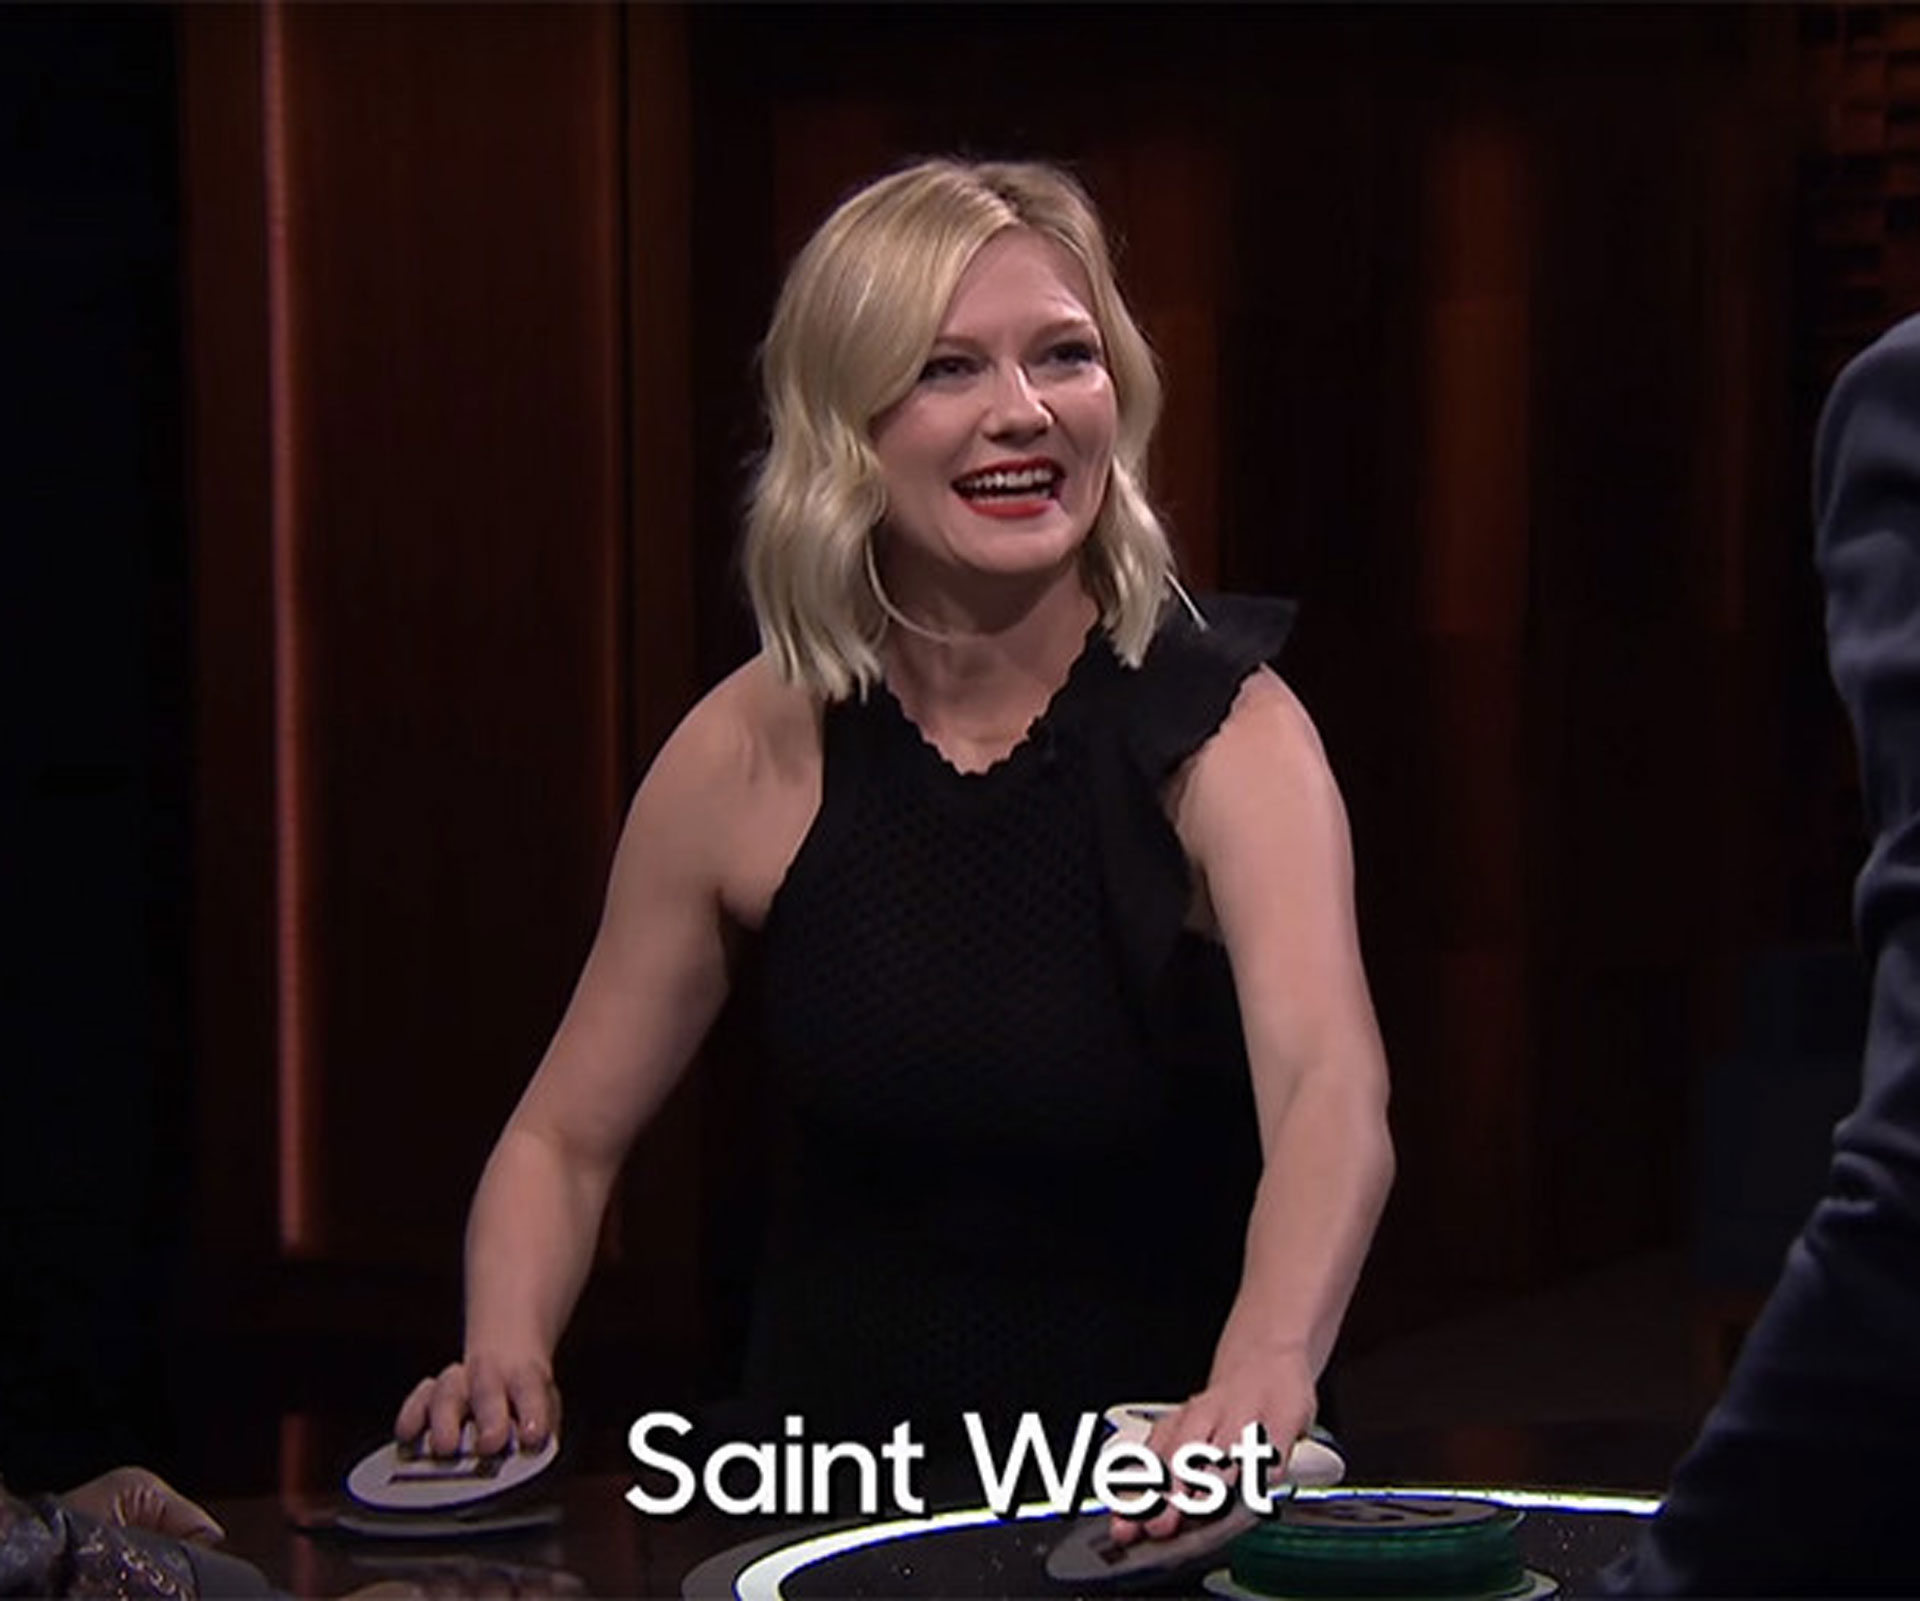 Kirsten Dunst on The Tonight Show with Jimmy Fallon